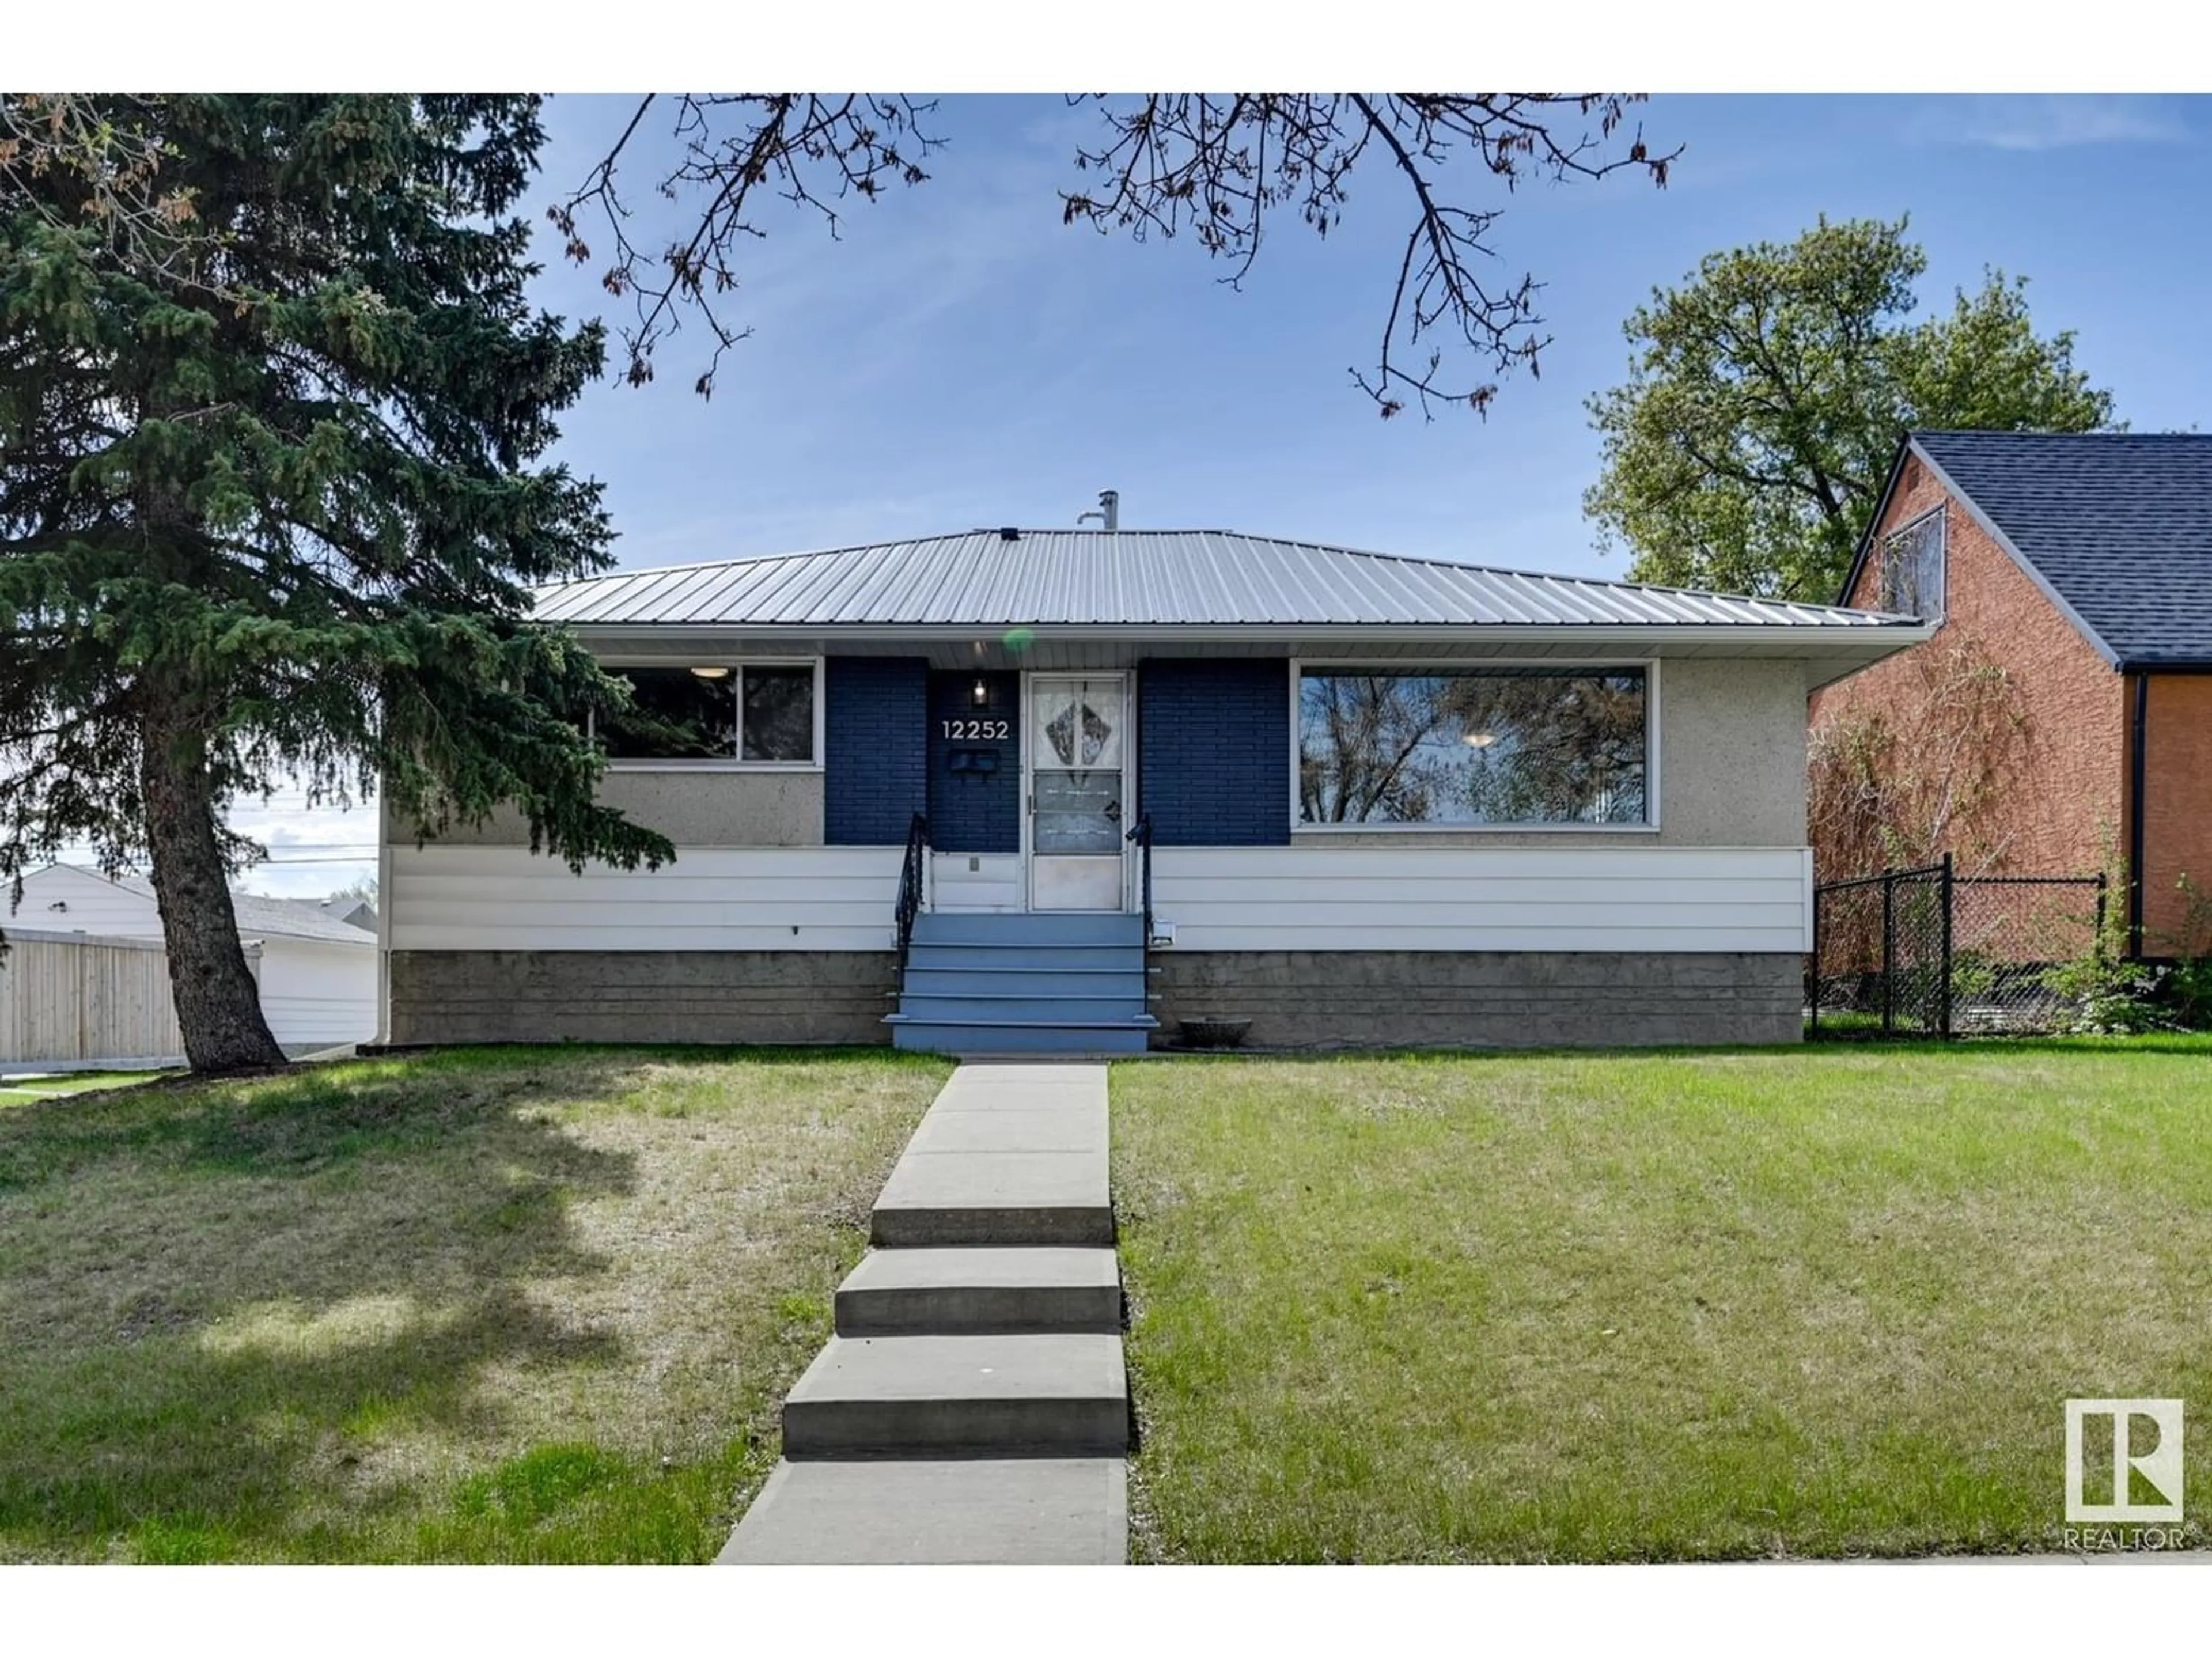 Frontside or backside of a home for 12252 132 ST NW, Edmonton Alberta T5L1P6